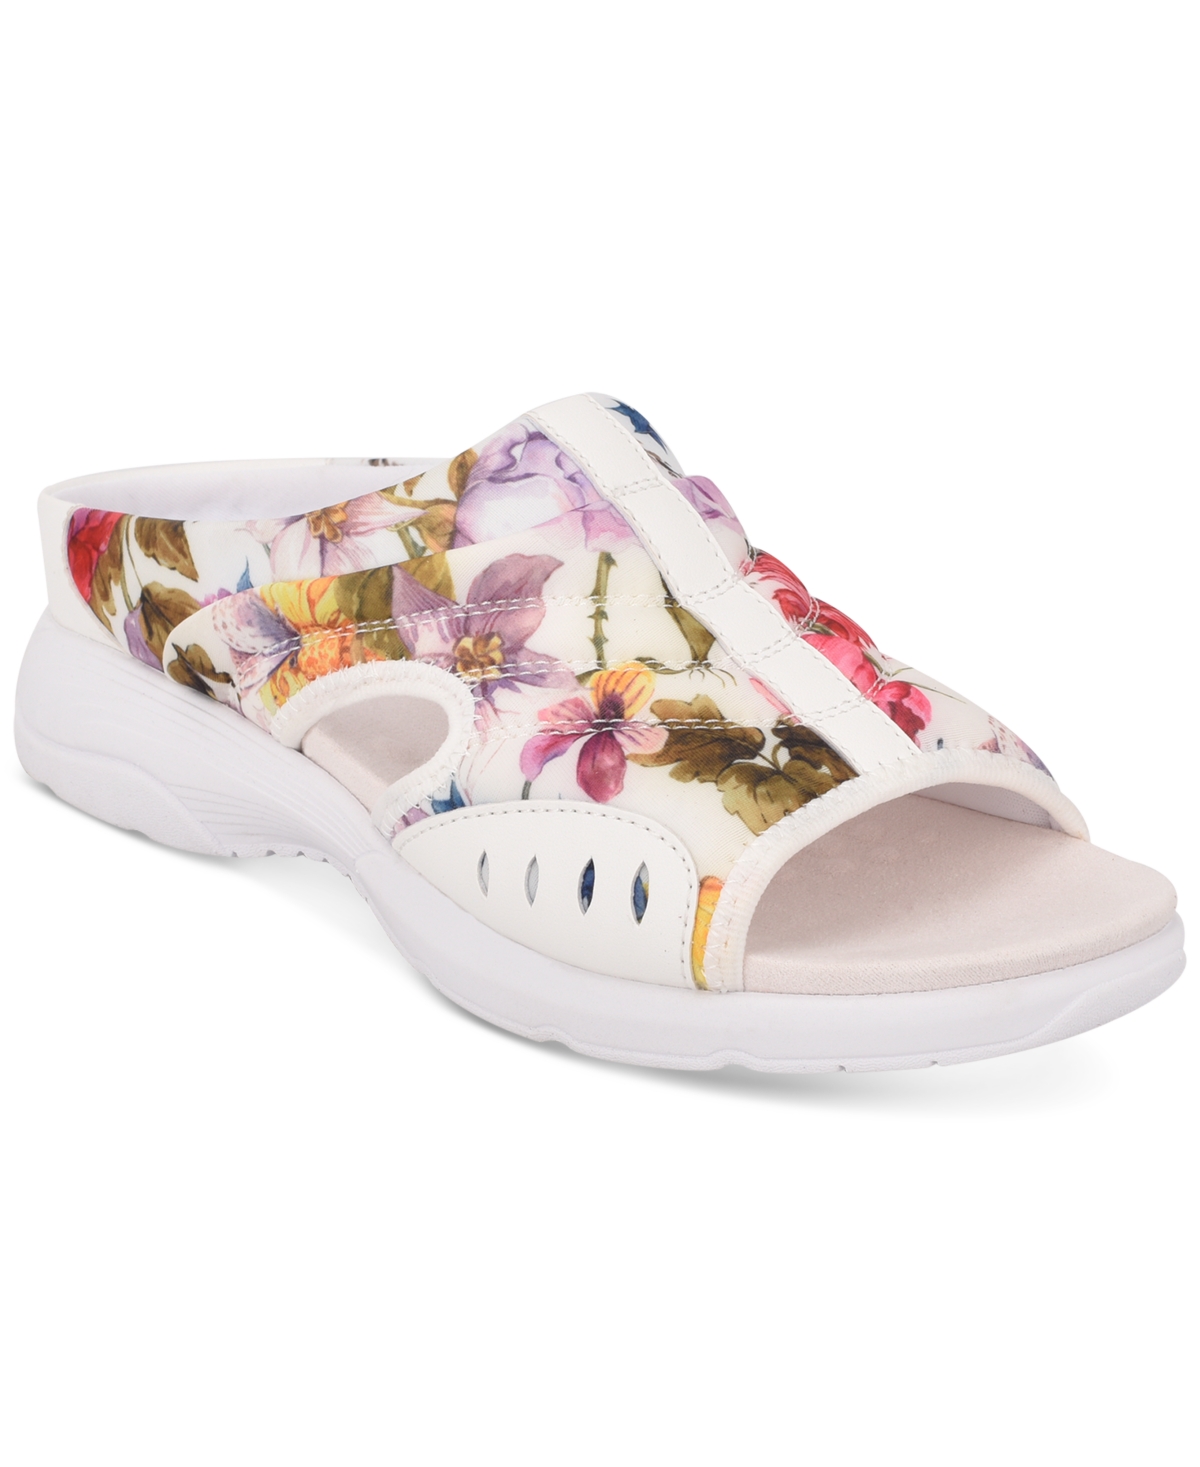 Easy Spirit Women's Traciee Square Toe Casual Slide Sandals In White,pink Floral Multi- Textile,manma